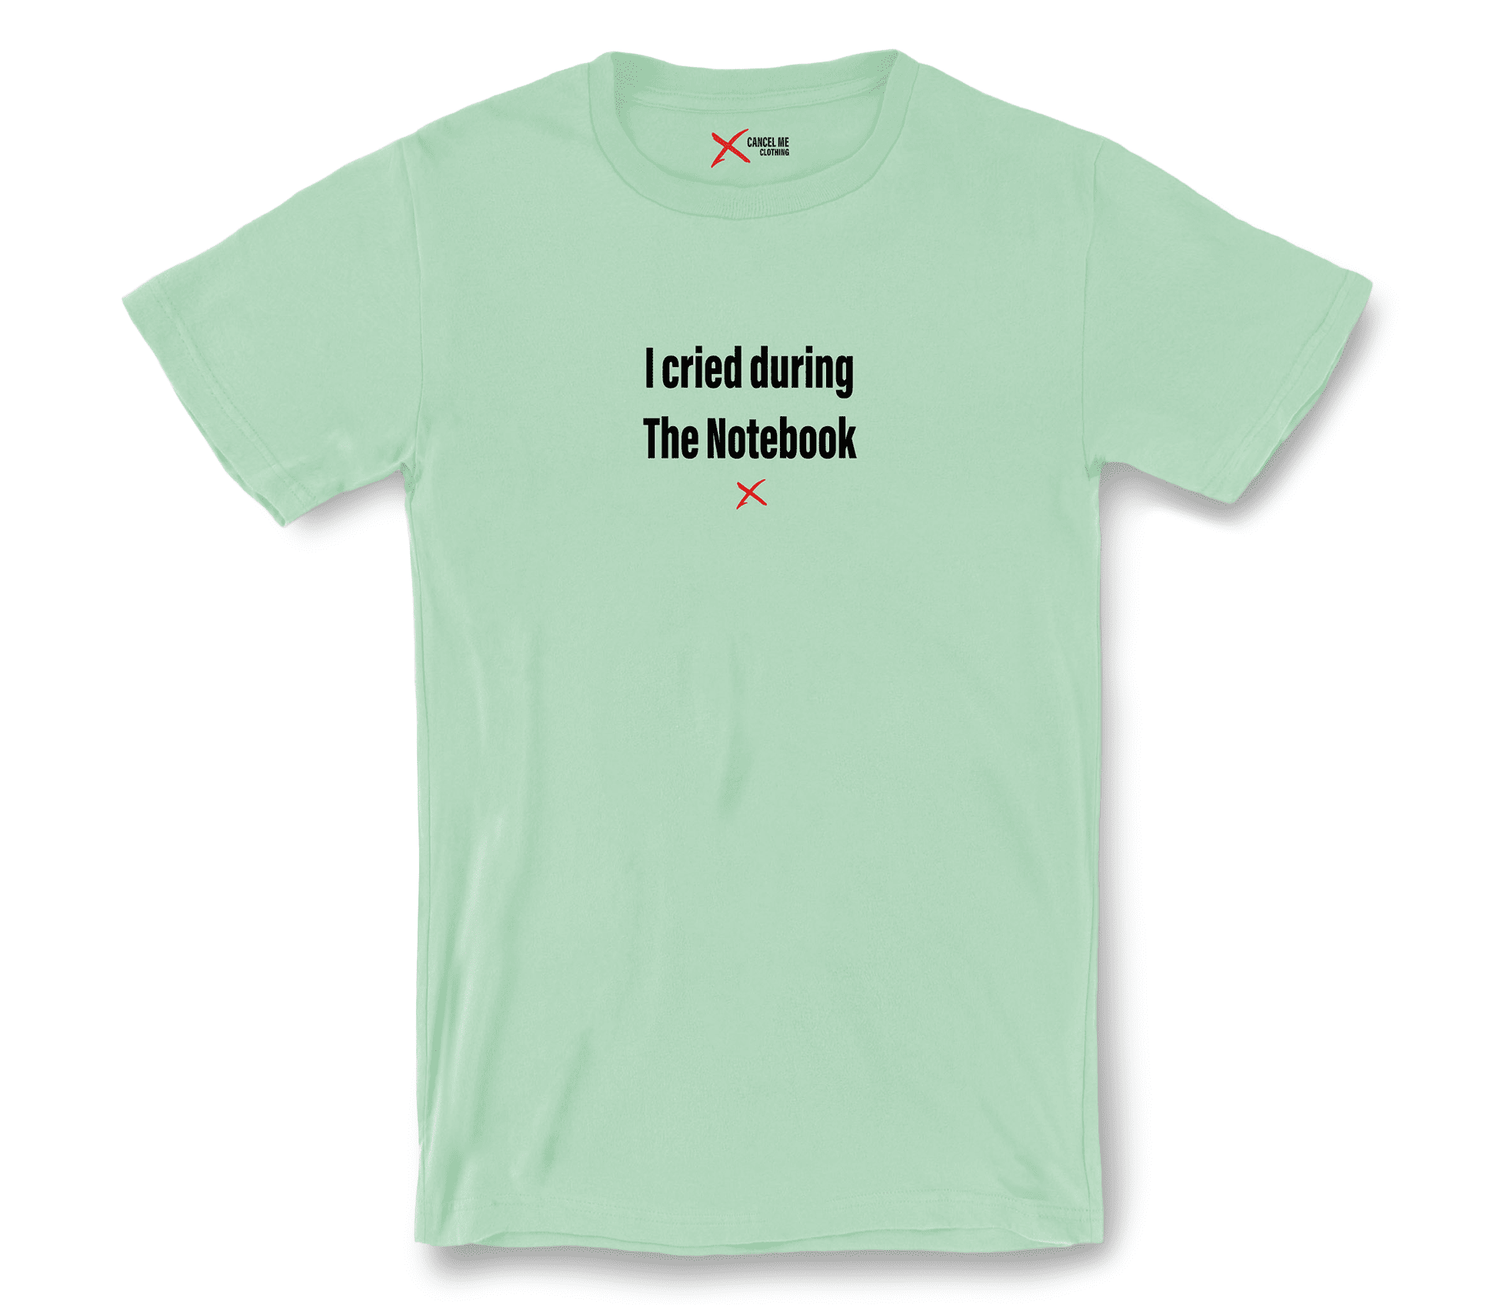 lp-tv_movies_2-shirt_7791710765226_i-cried-during-the-notebook-shirt_Heather Mint.png